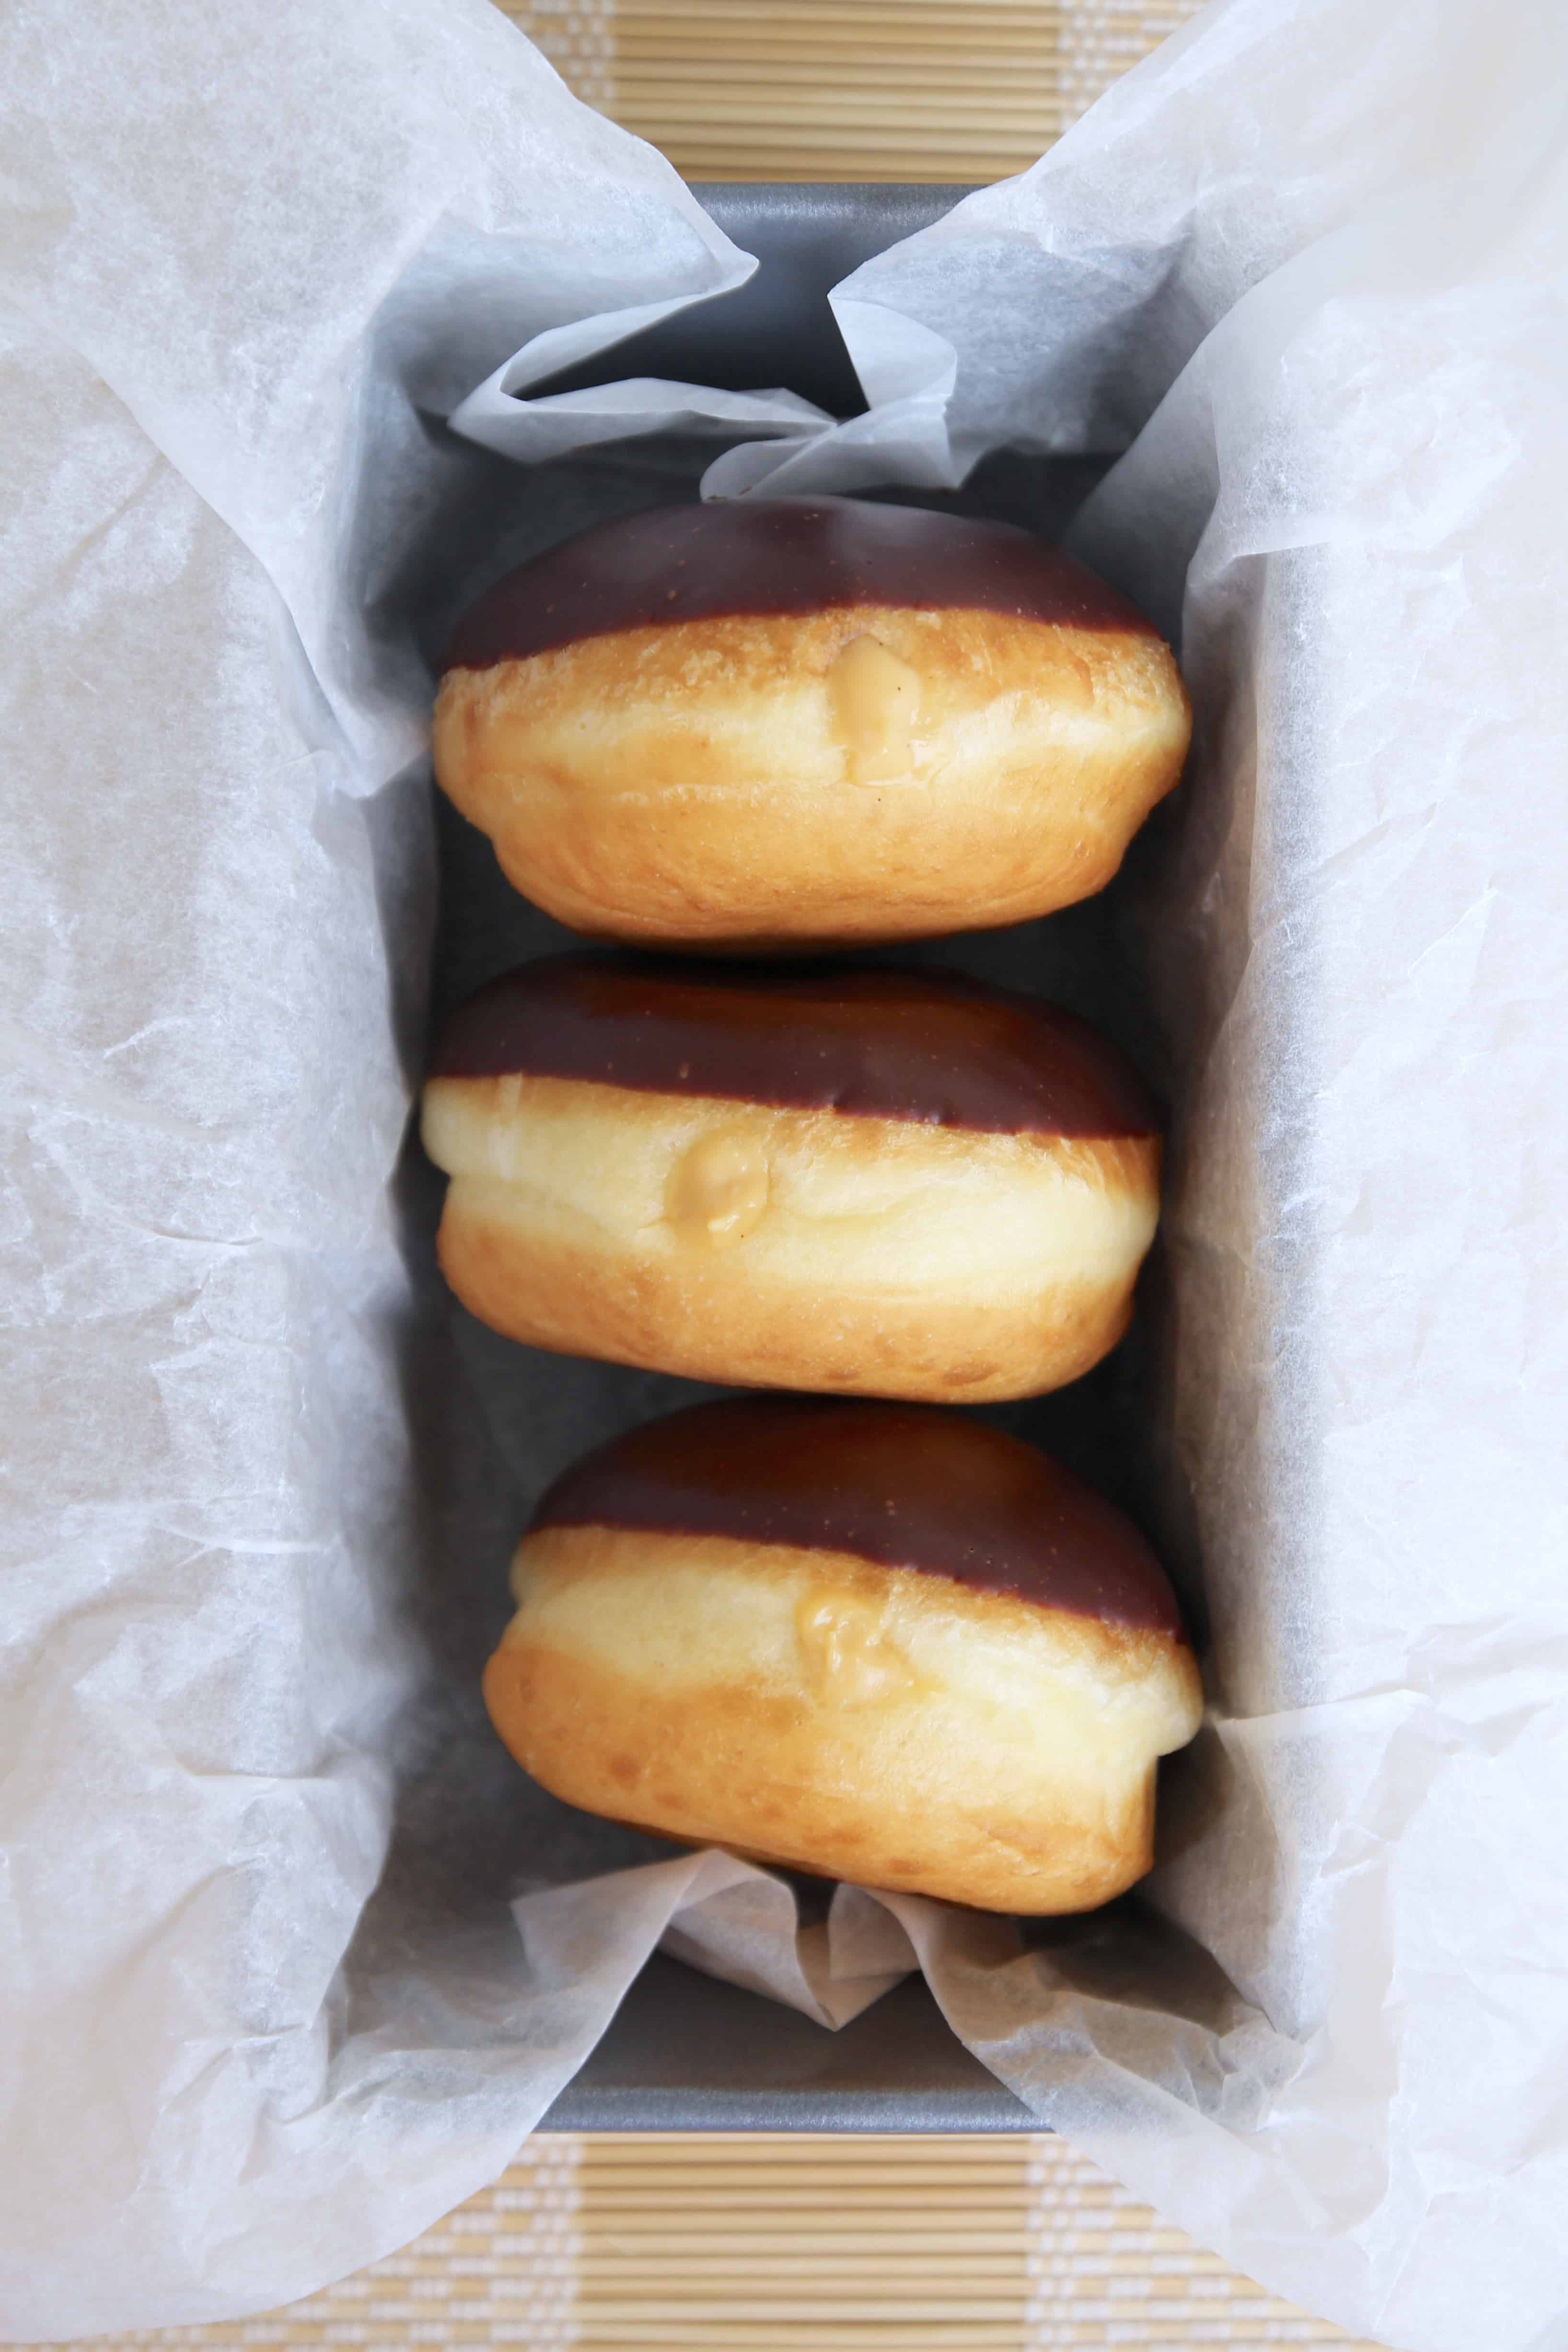 Three Boston cream donuts in a loaf pan